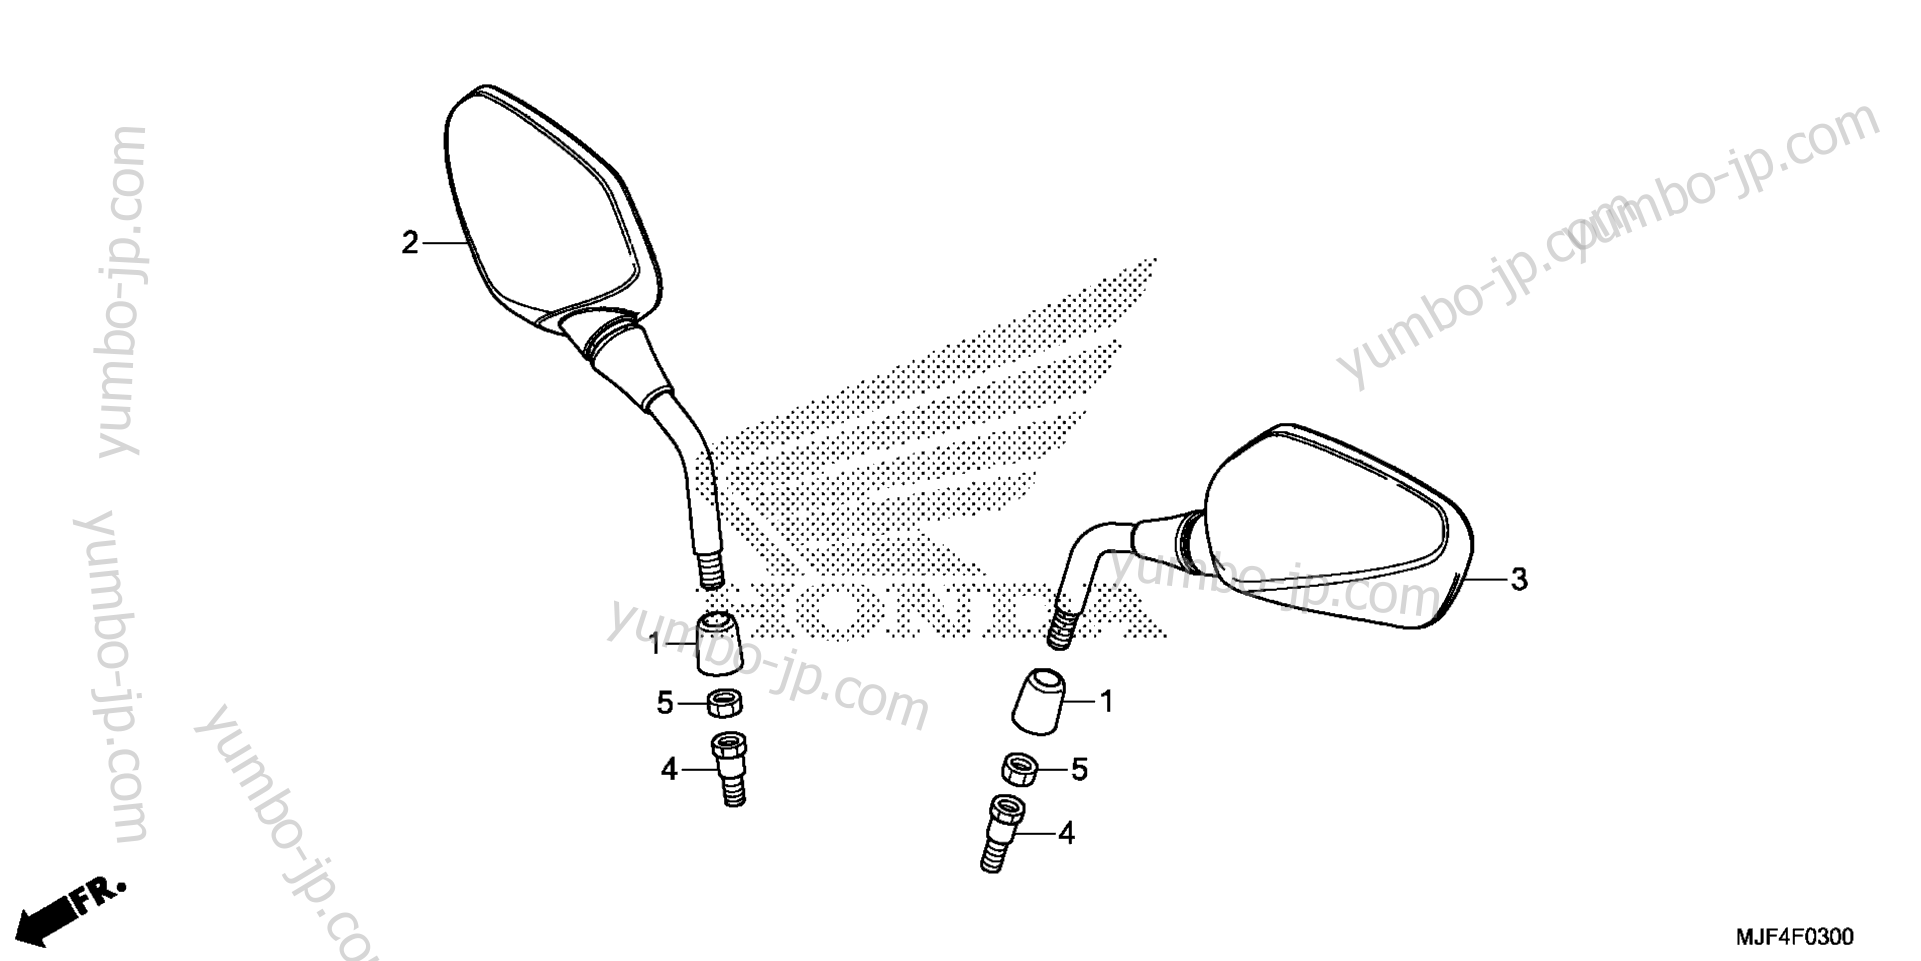 MIRROR for motorcycles HONDA CTX700N A 2015 year